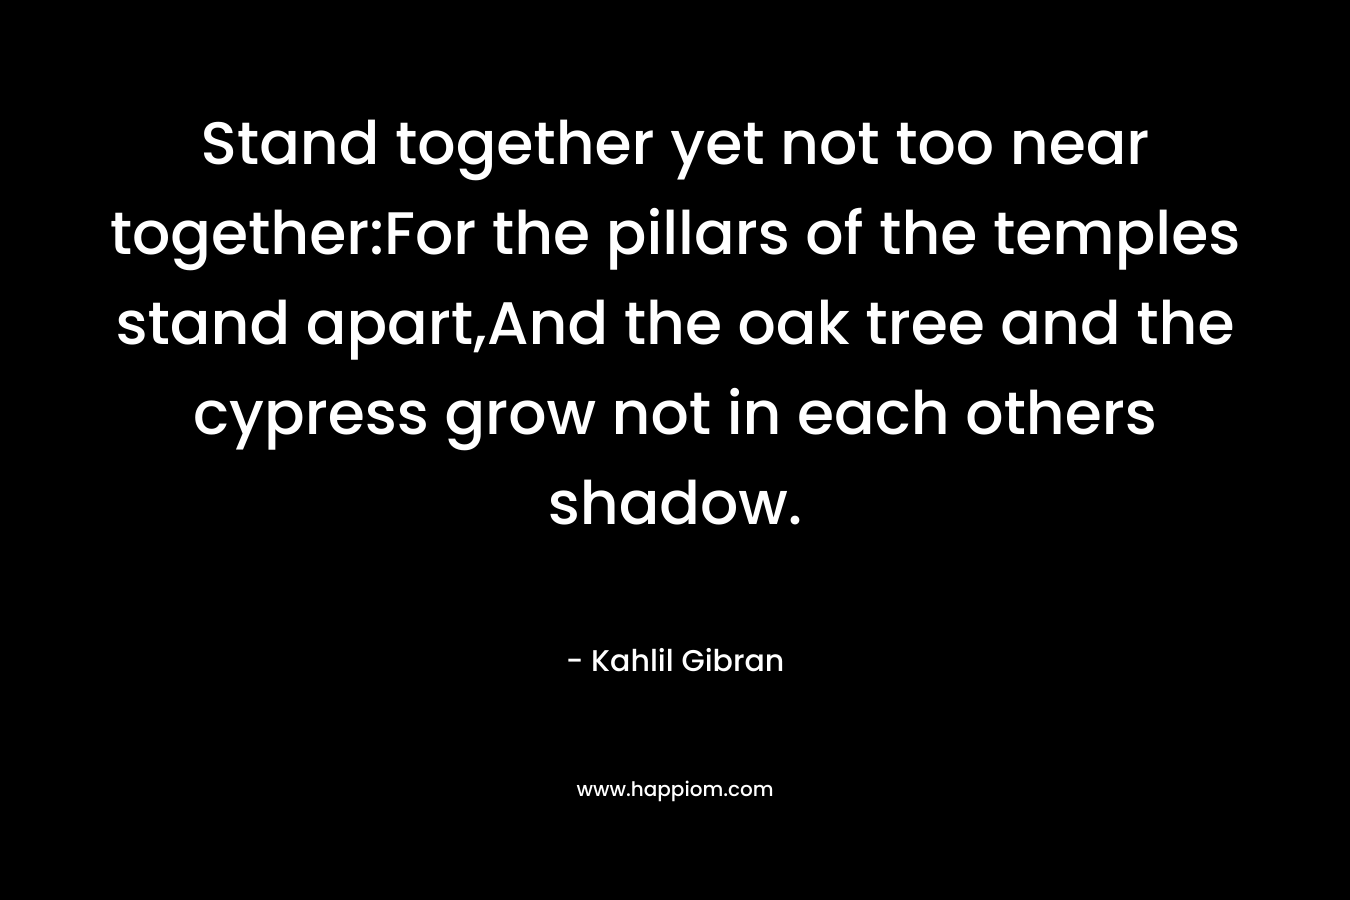 Stand together yet not too near together:For the pillars of the temples stand apart,And the oak tree and the cypress grow not in each others shadow. – Kahlil Gibran